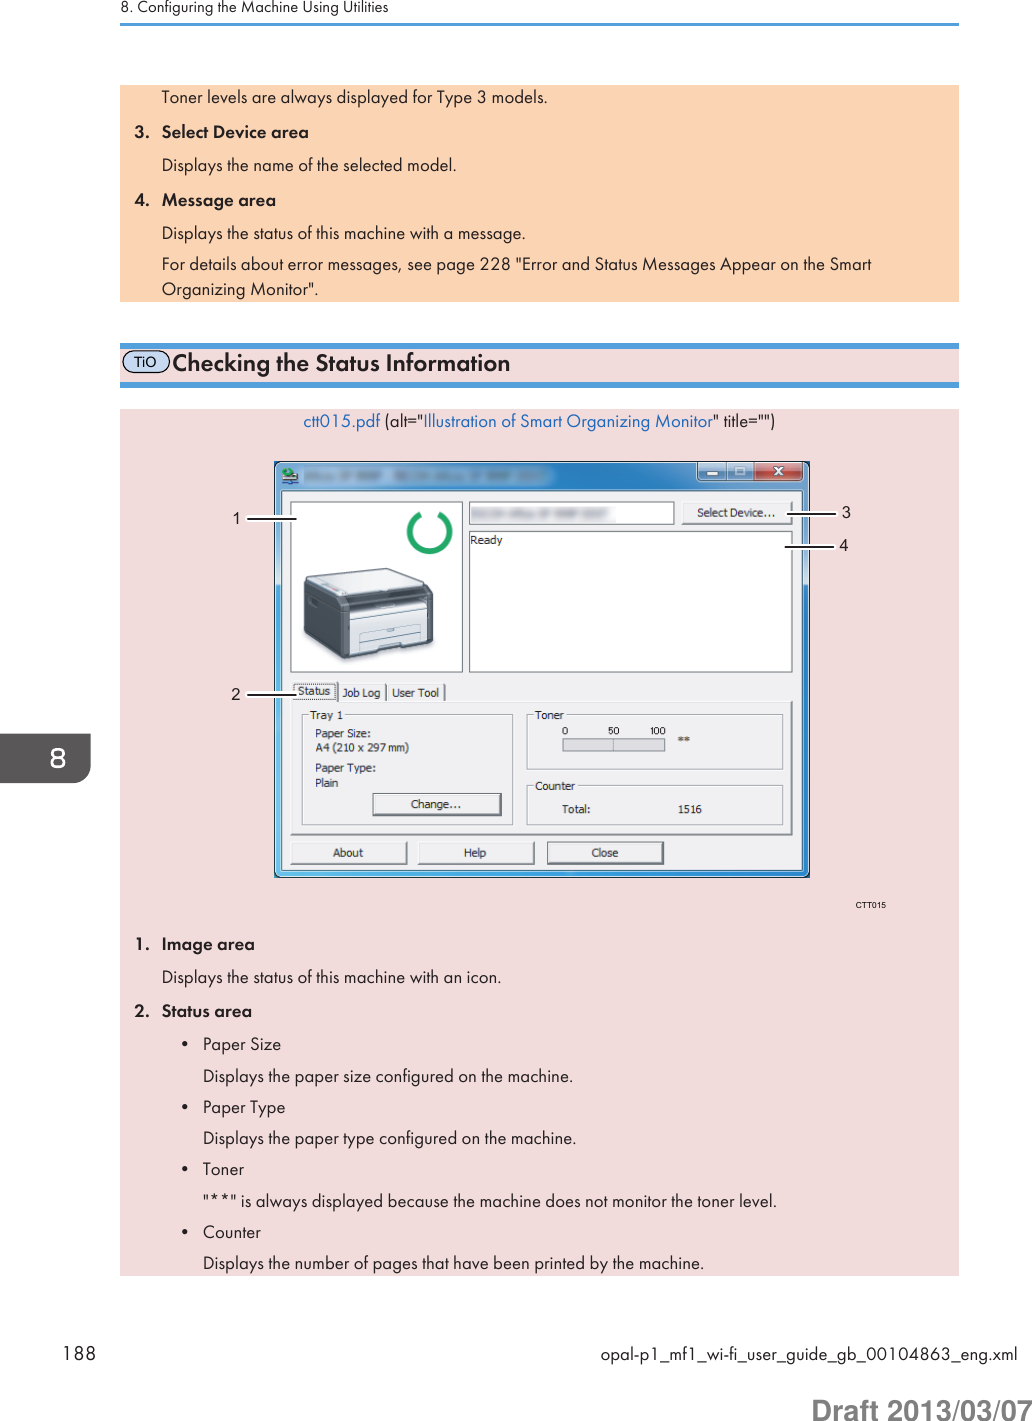 Toner levels are always displayed for Type 3 models.3. Select Device areaDisplays the name of the selected model.4. Message areaDisplays the status of this machine with a message.For details about error messages, see page 228 &quot;Error and Status Messages Appear on the SmartOrganizing Monitor&quot;.TiOChecking the Status Informationctt015.pdf (alt=&quot;Illustration of Smart Organizing Monitor&quot; title=&quot;&quot;)CTT01512341. Image areaDisplays the status of this machine with an icon.2. Status area• Paper SizeDisplays the paper size configured on the machine.• Paper TypeDisplays the paper type configured on the machine.• Toner&quot;**&quot; is always displayed because the machine does not monitor the toner level.• CounterDisplays the number of pages that have been printed by the machine.8. Configuring the Machine Using Utilities188 opal-p1_mf1_wi-fi_user_guide_gb_00104863_eng.xmlDraft 2013/03/07